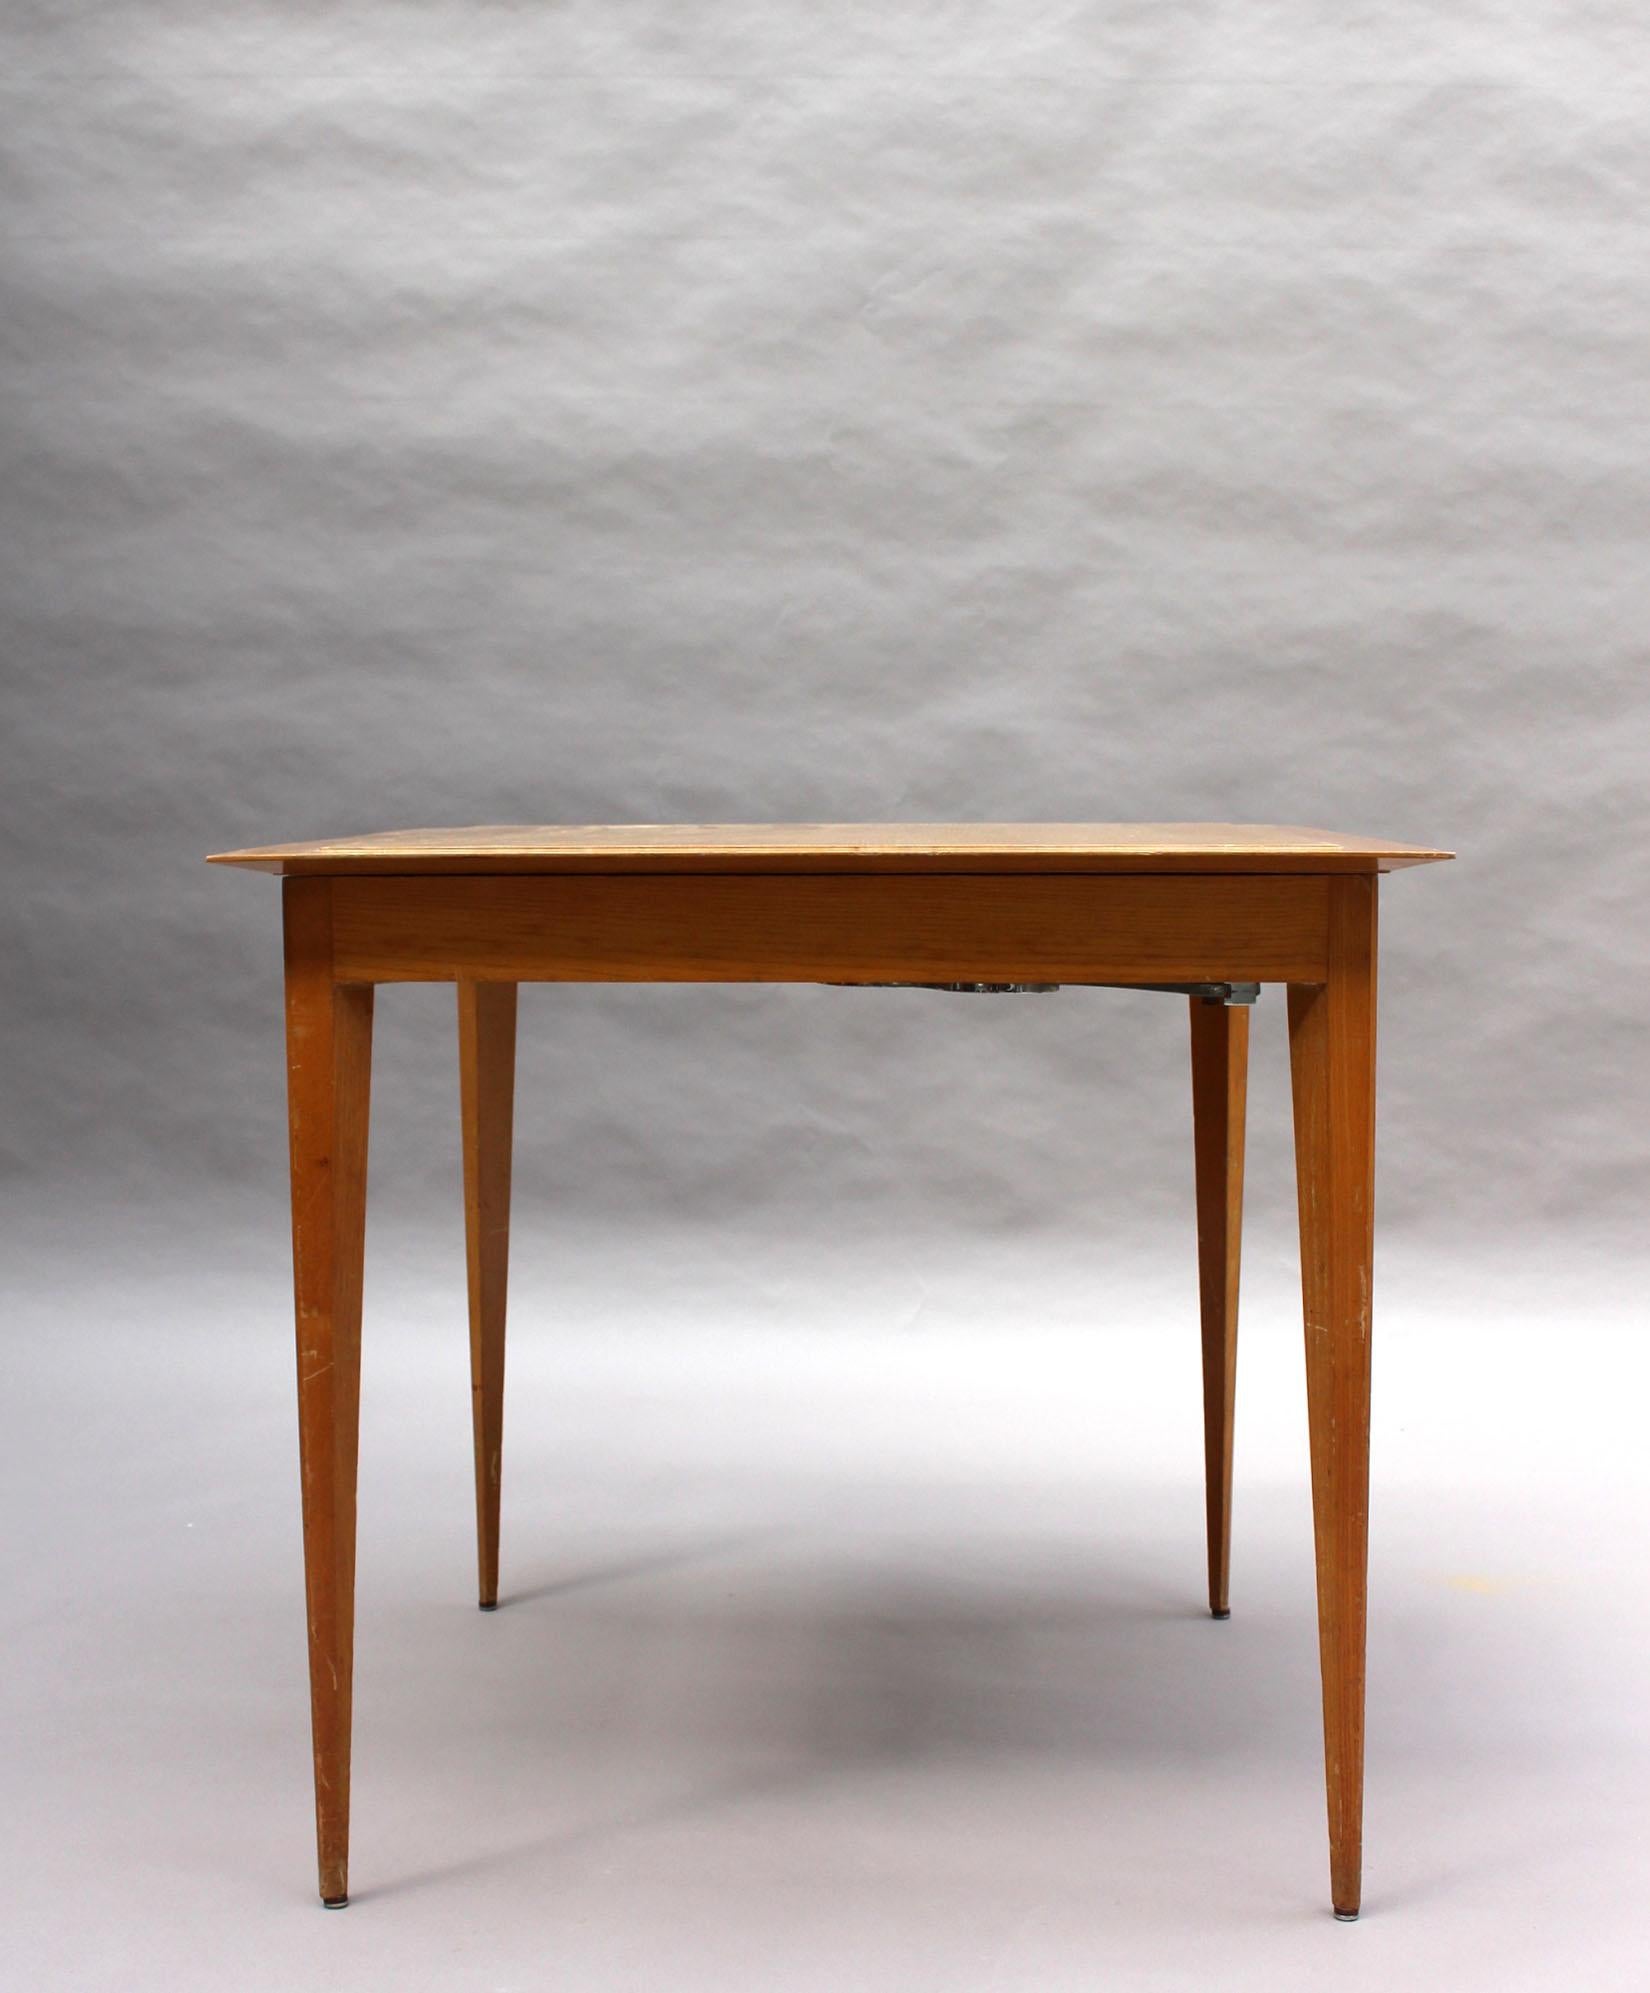 Rinck - established in 1841 and directed by Maurice Rinck in the Art Deco / mid-century period.
A fine game / tea table in elm with a reversible top (wood on one side and felt on the other) with four tapered legs and chrome cup / ashtray